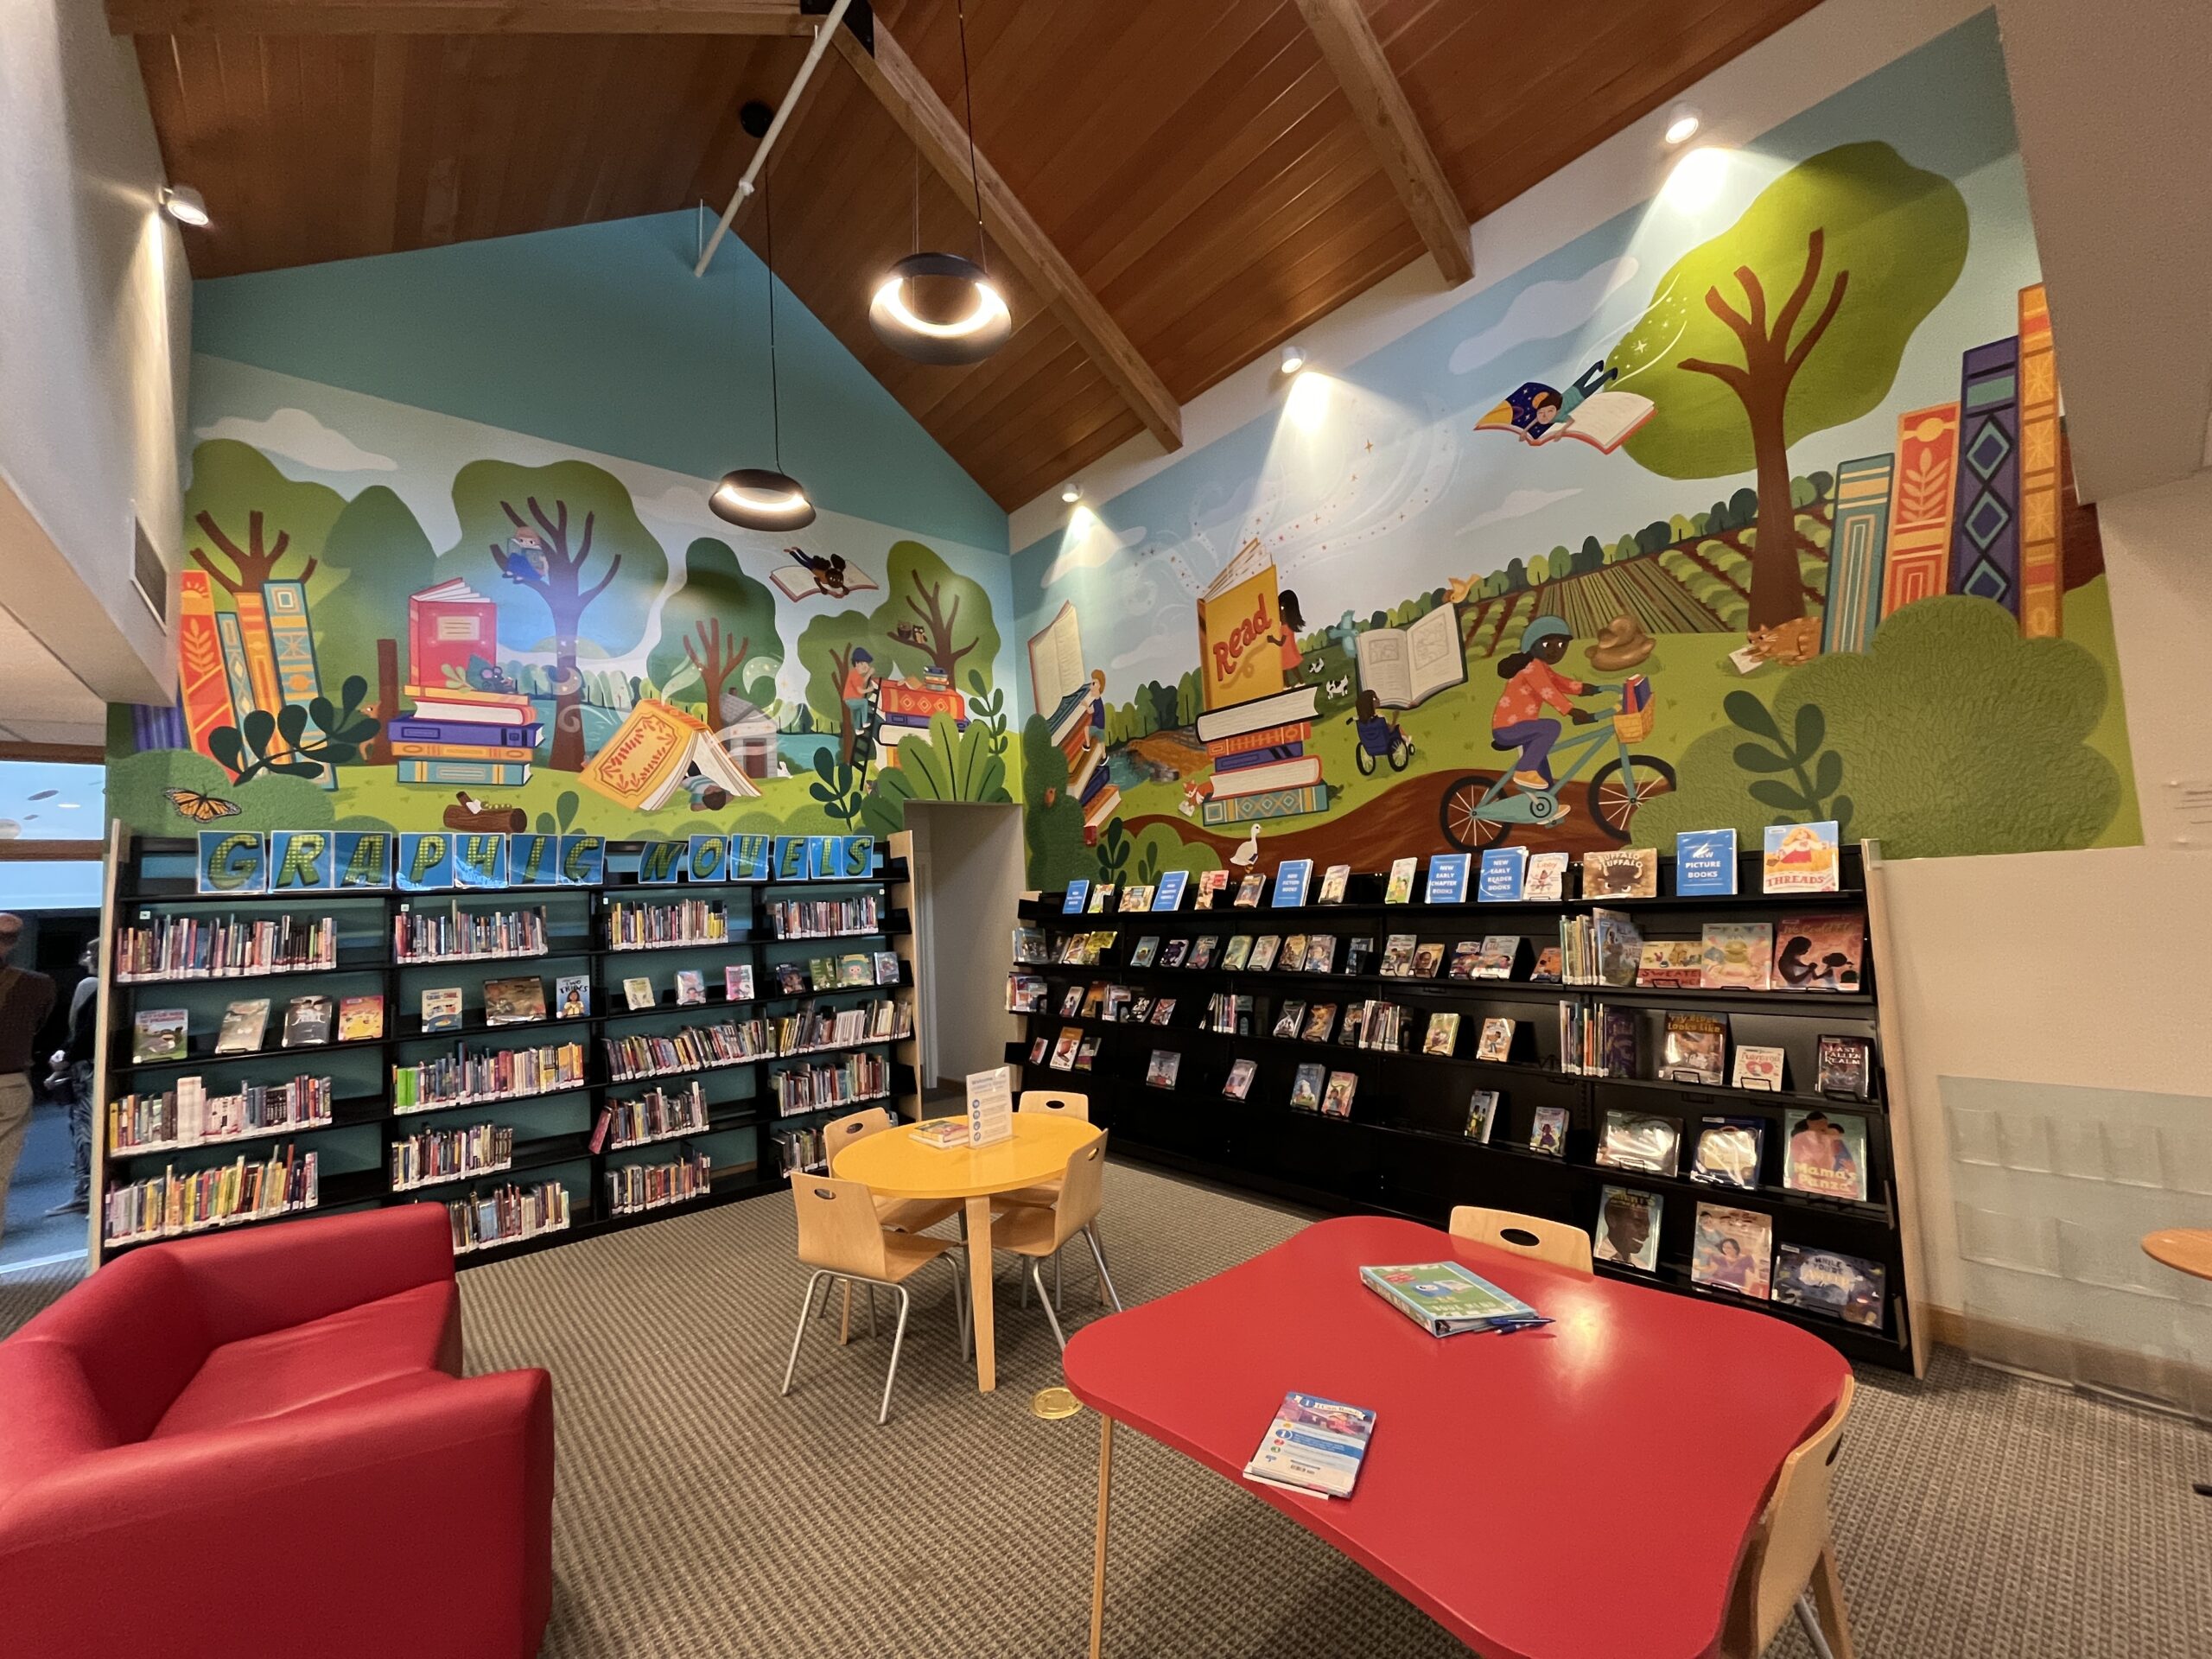 A mural and books in the children's section of the Concord Free Public Library.